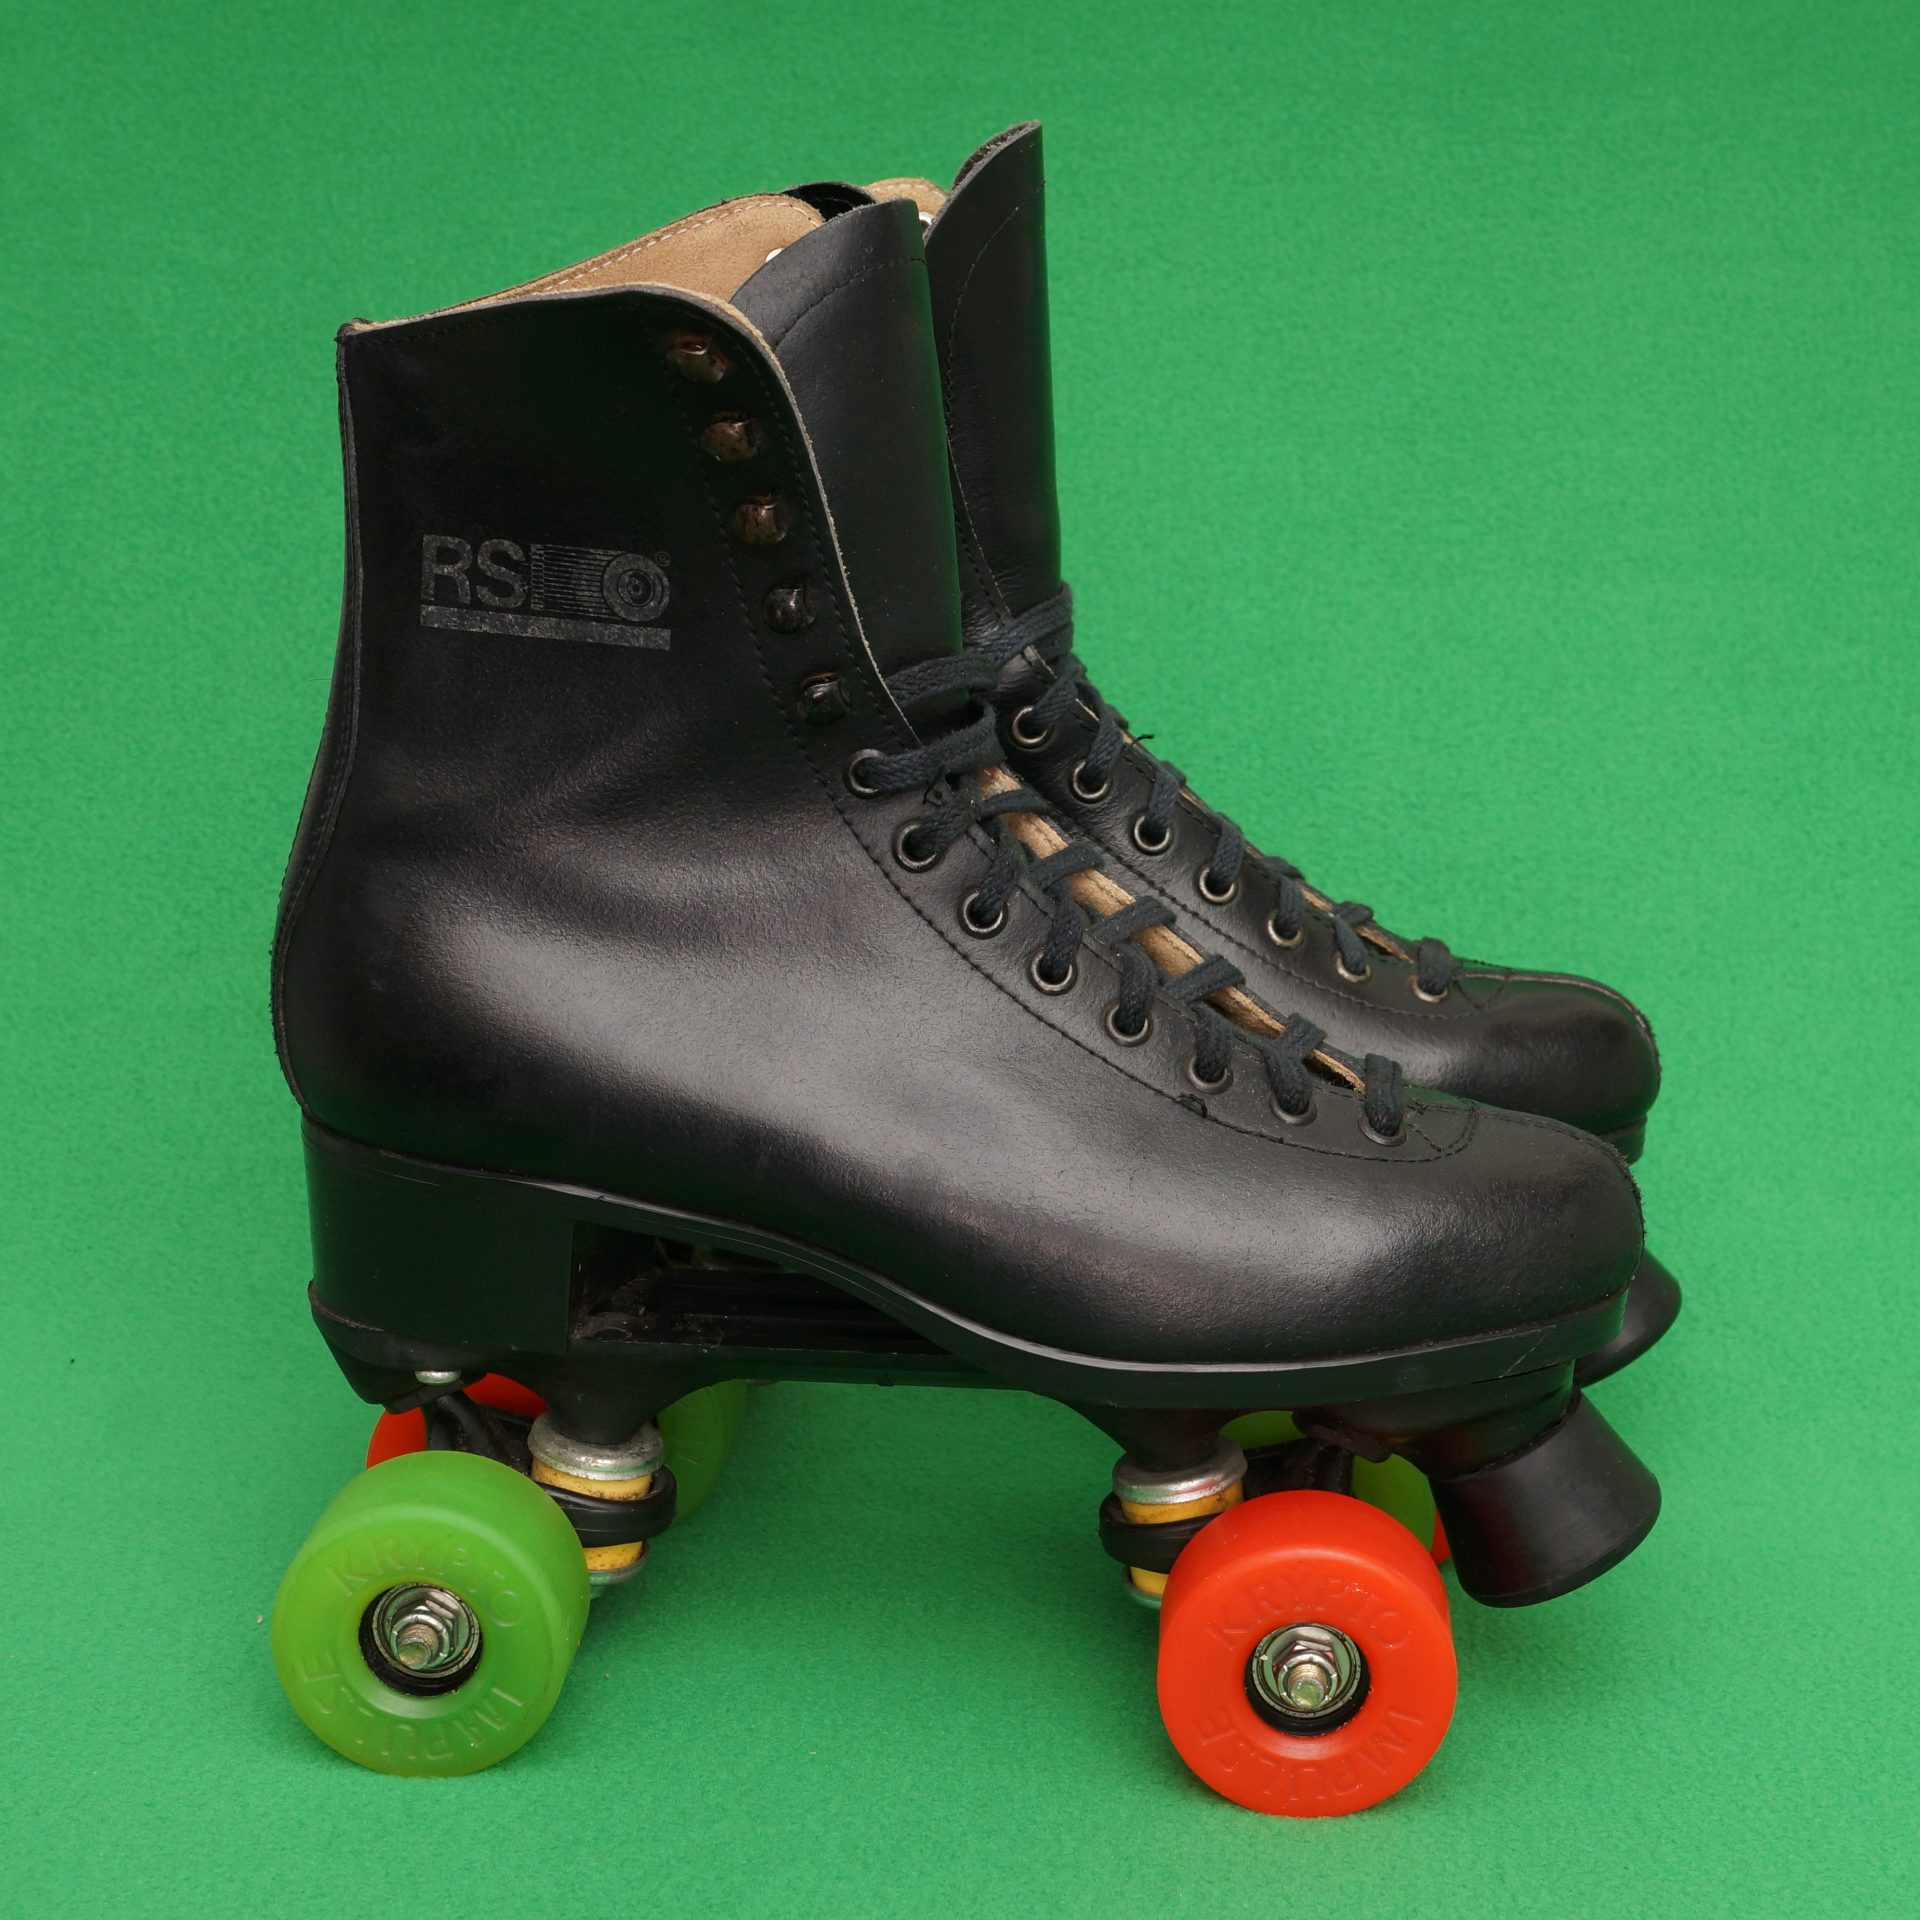 RSI rollerskates with wheels - No Pro